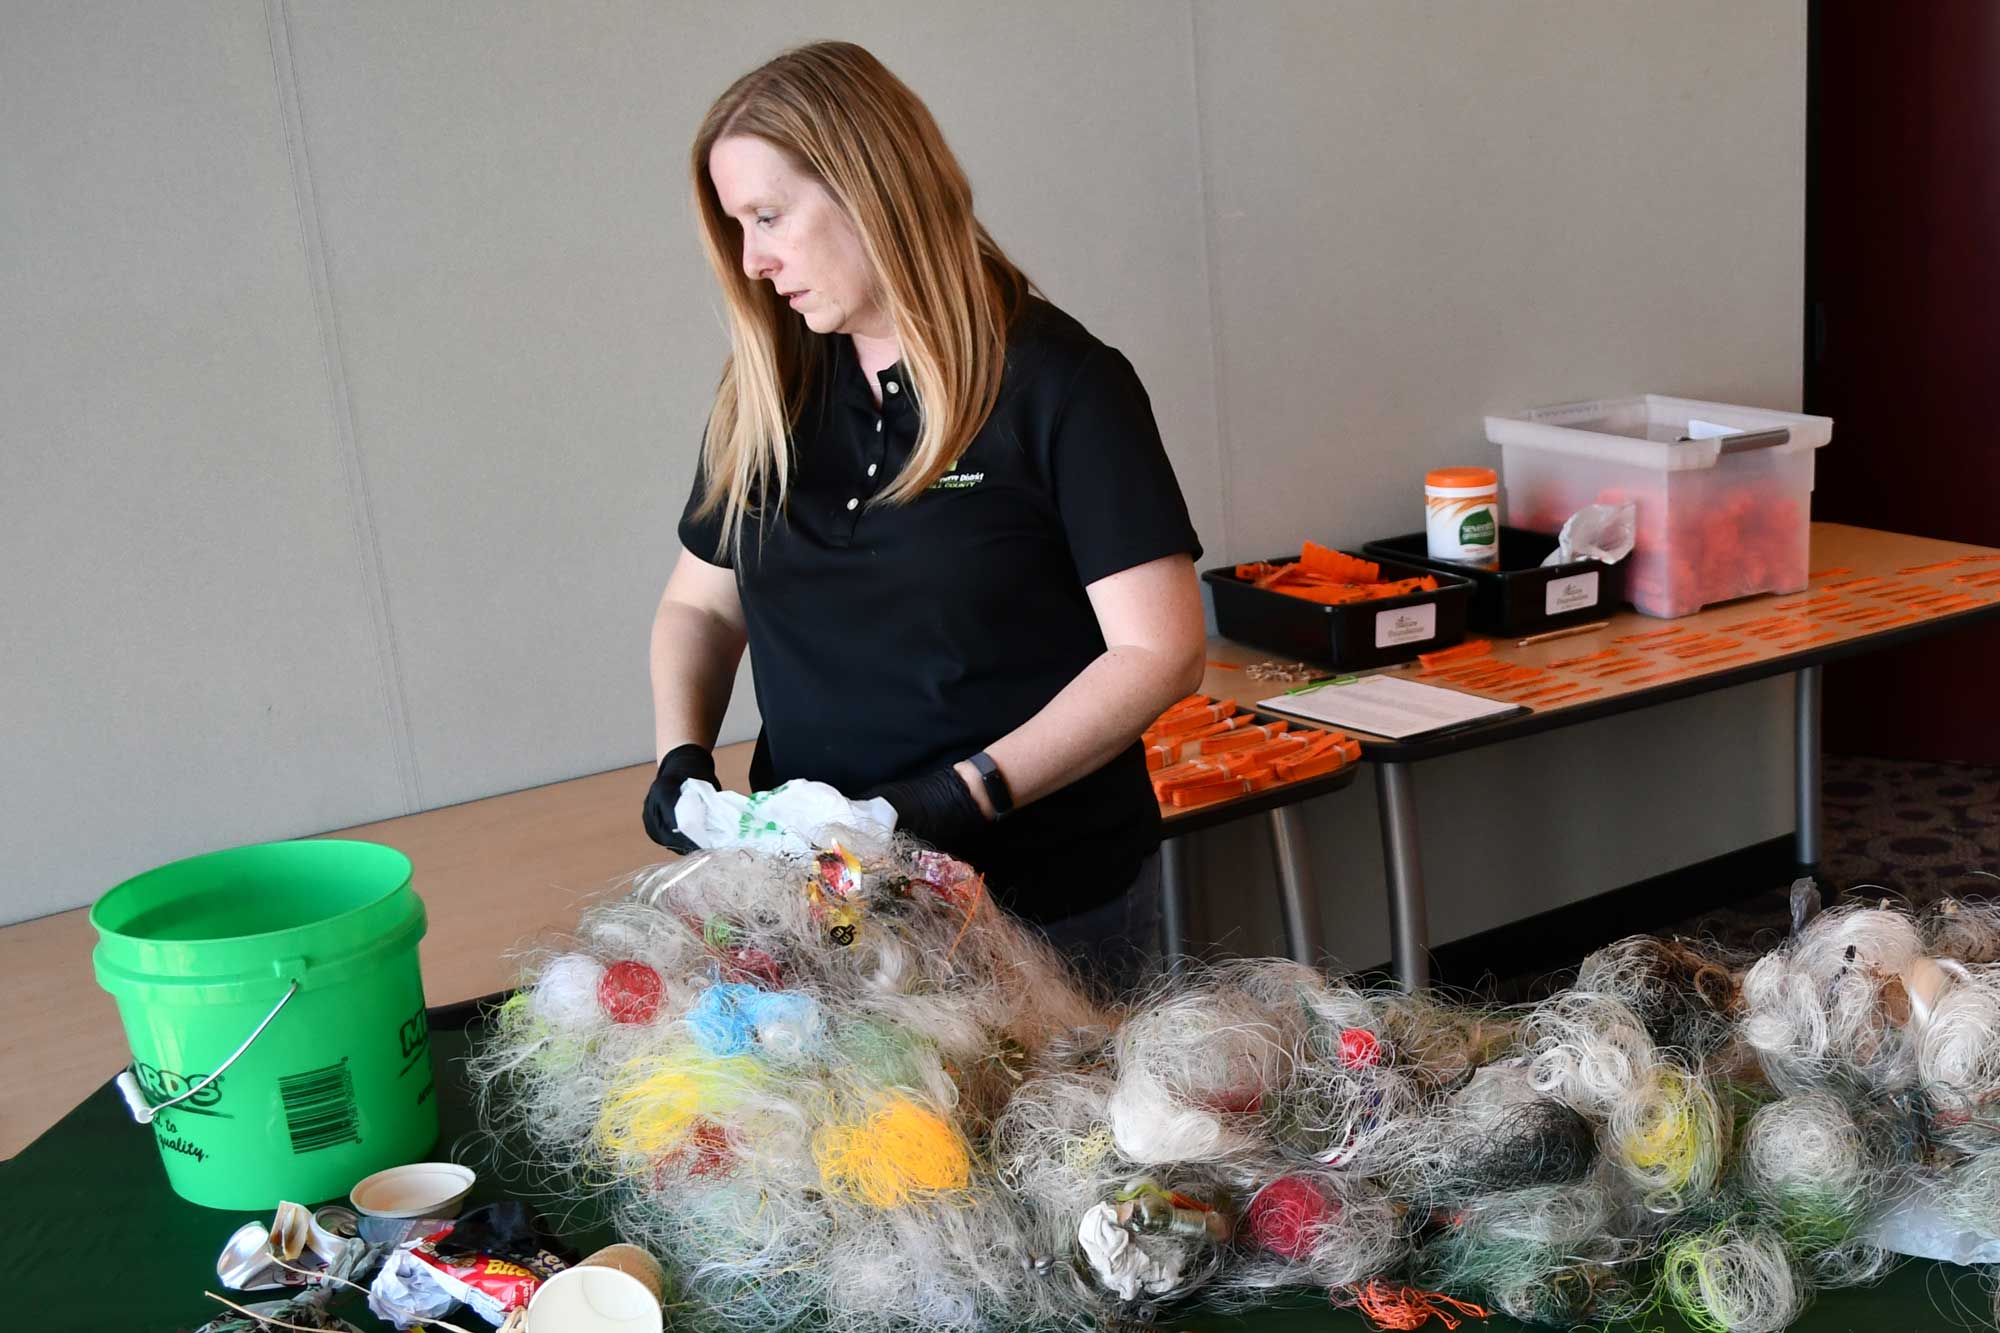 A woman sorts through fishing line that has been collected for recycling.